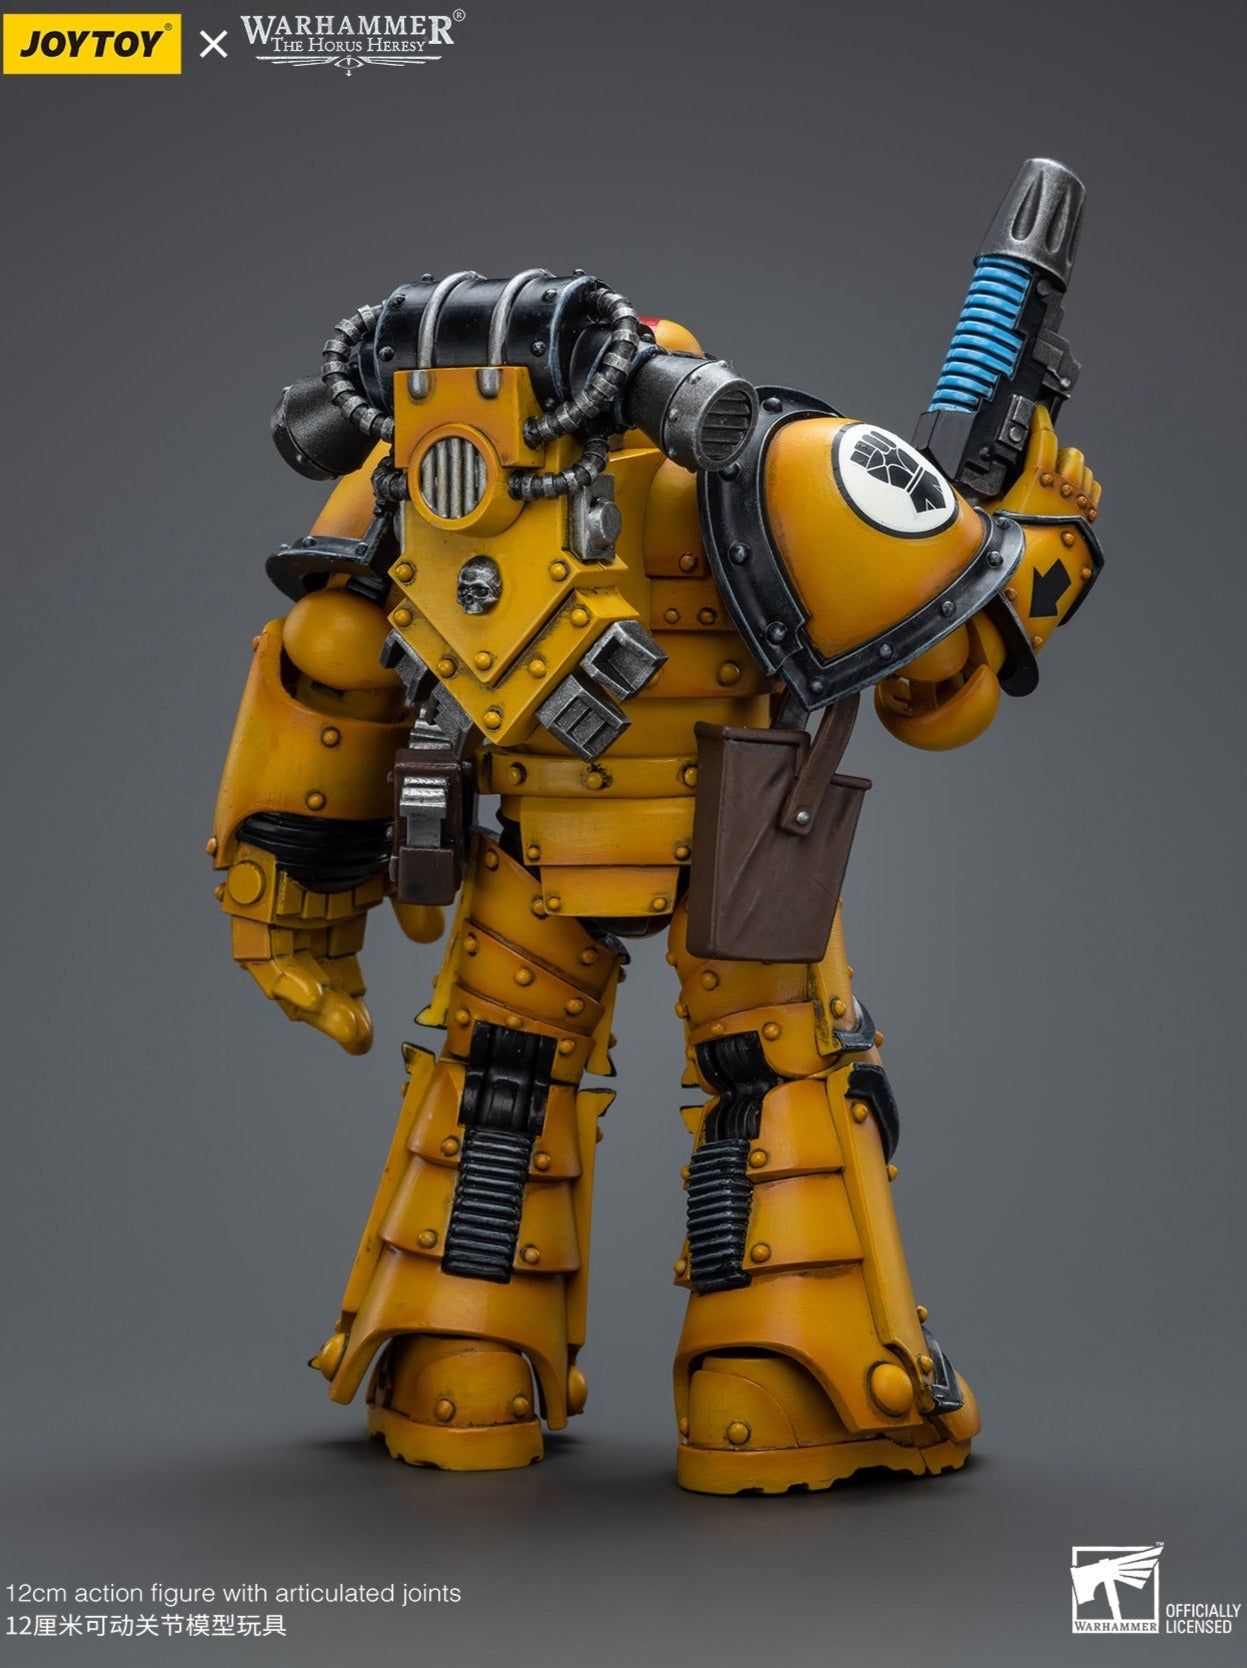 Warhammer: The Horus Hersey: Imperial Fists:Legion MkIII Tactical Squad Sergeant with Power Fist-Joy Toy